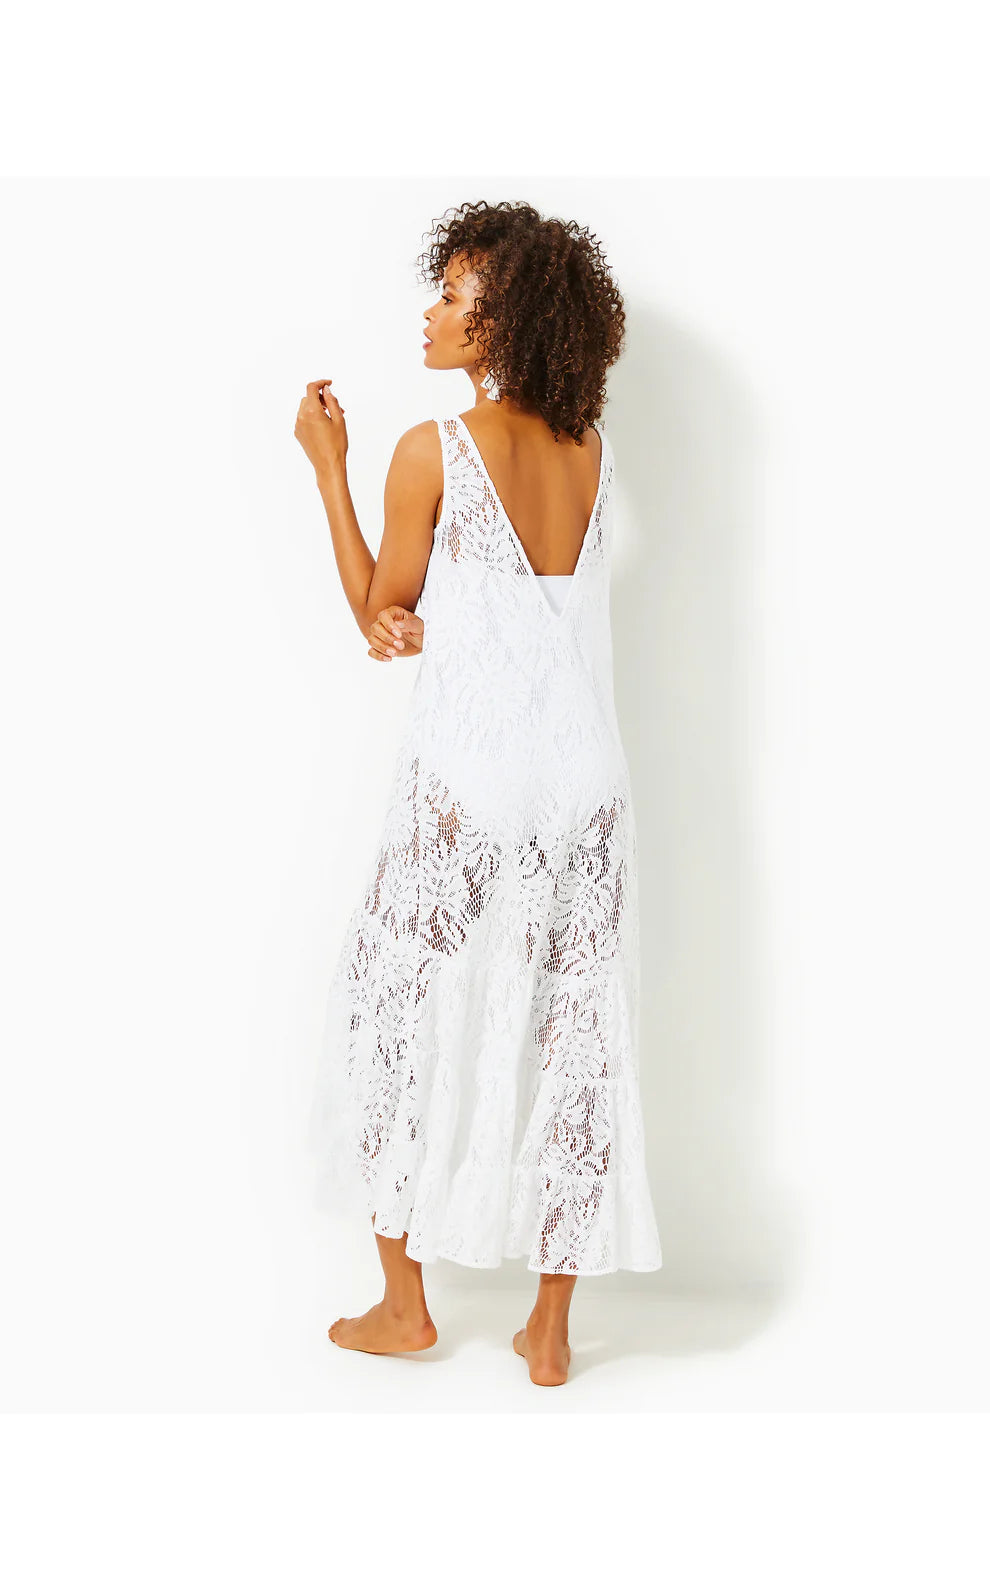 FINNLEY LACE COVERUP, RESORT WHITE PARADISE FOUND LACE